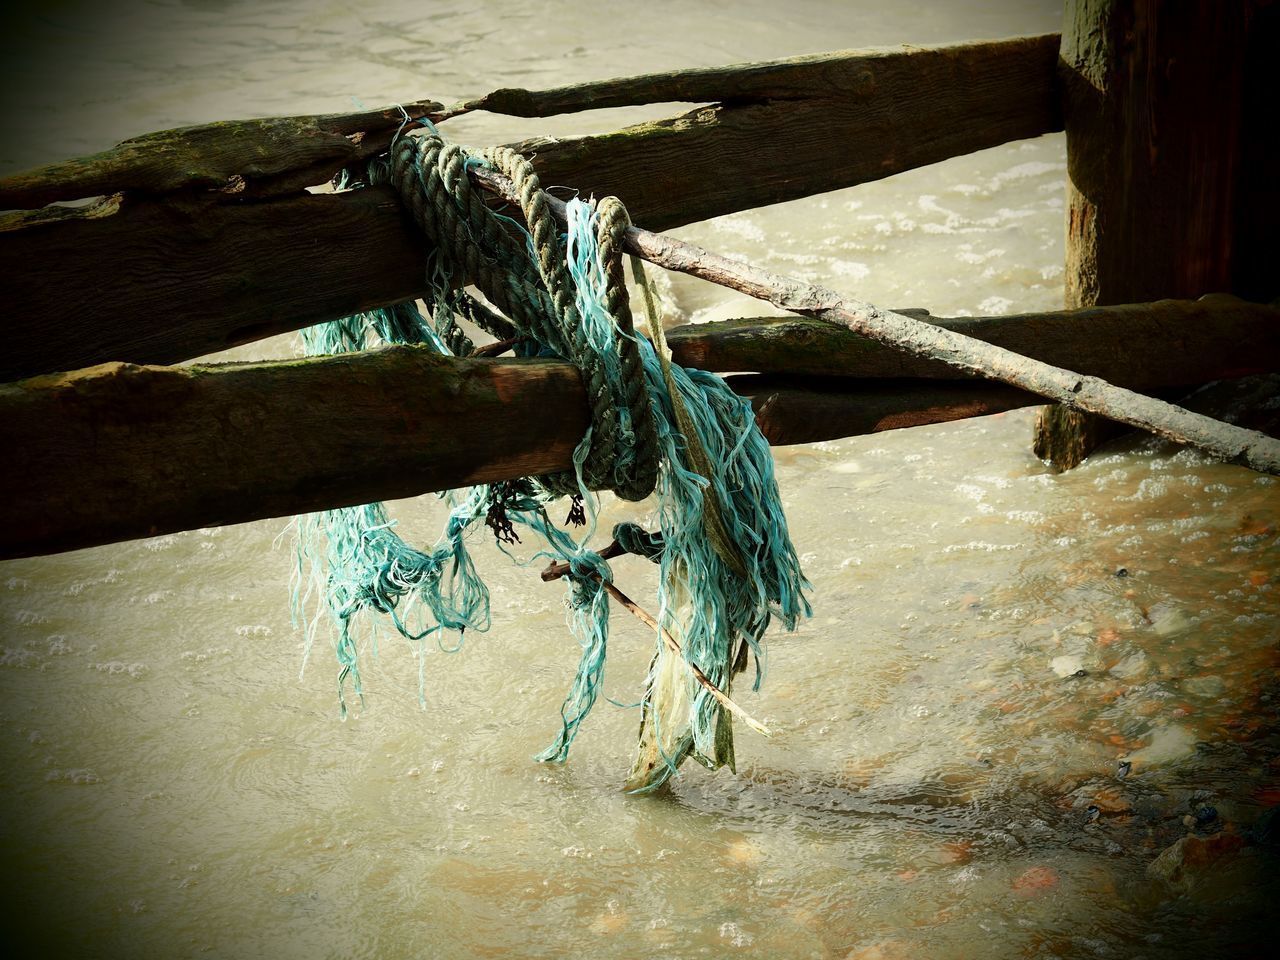 CLOSE-UP OF TIED HANGING ON ROPE